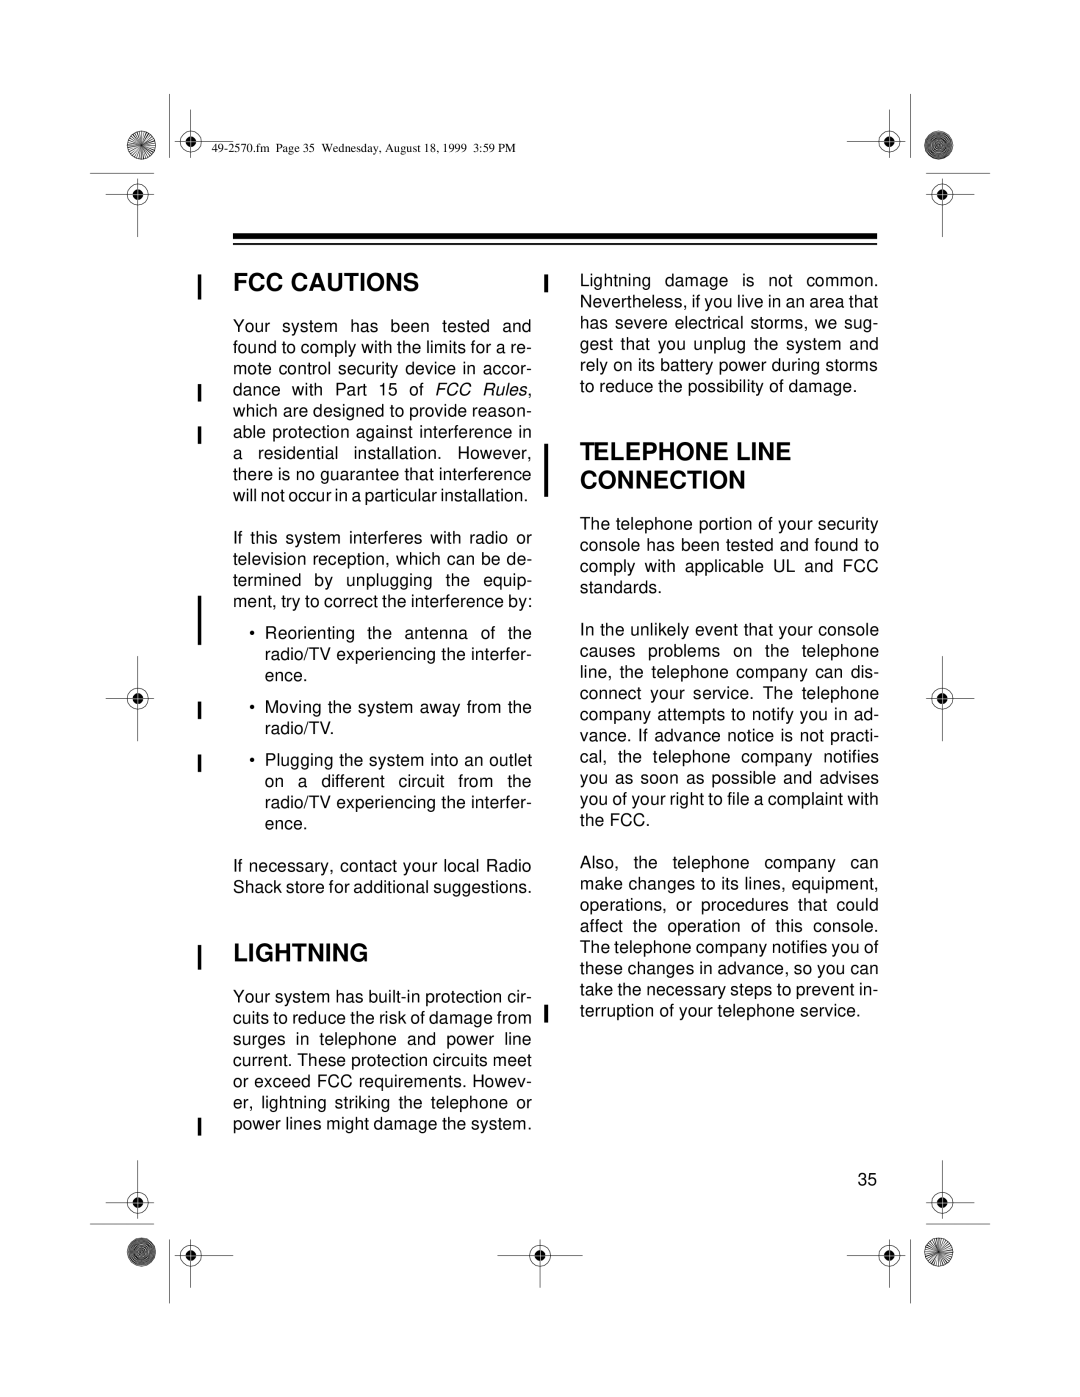 Radio Shack 49-2570 owner manual Fcc Cautions, Lightning, Telephone Line Connection 